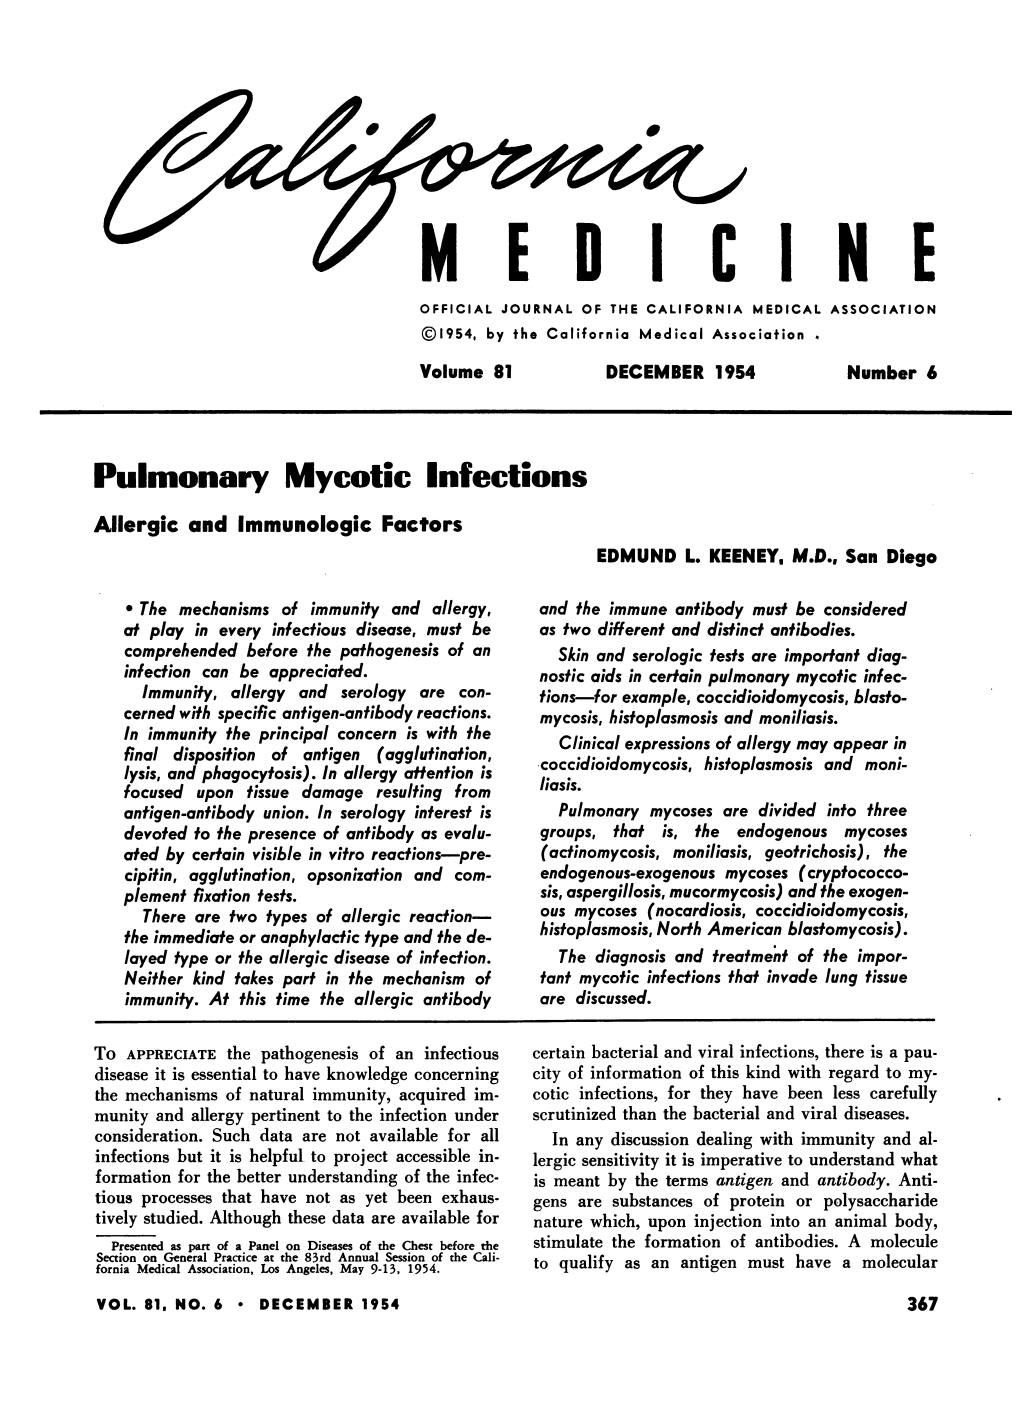 PULMONARY MYCOTIC INFECTIONS—Allergic and Immunologic Factors